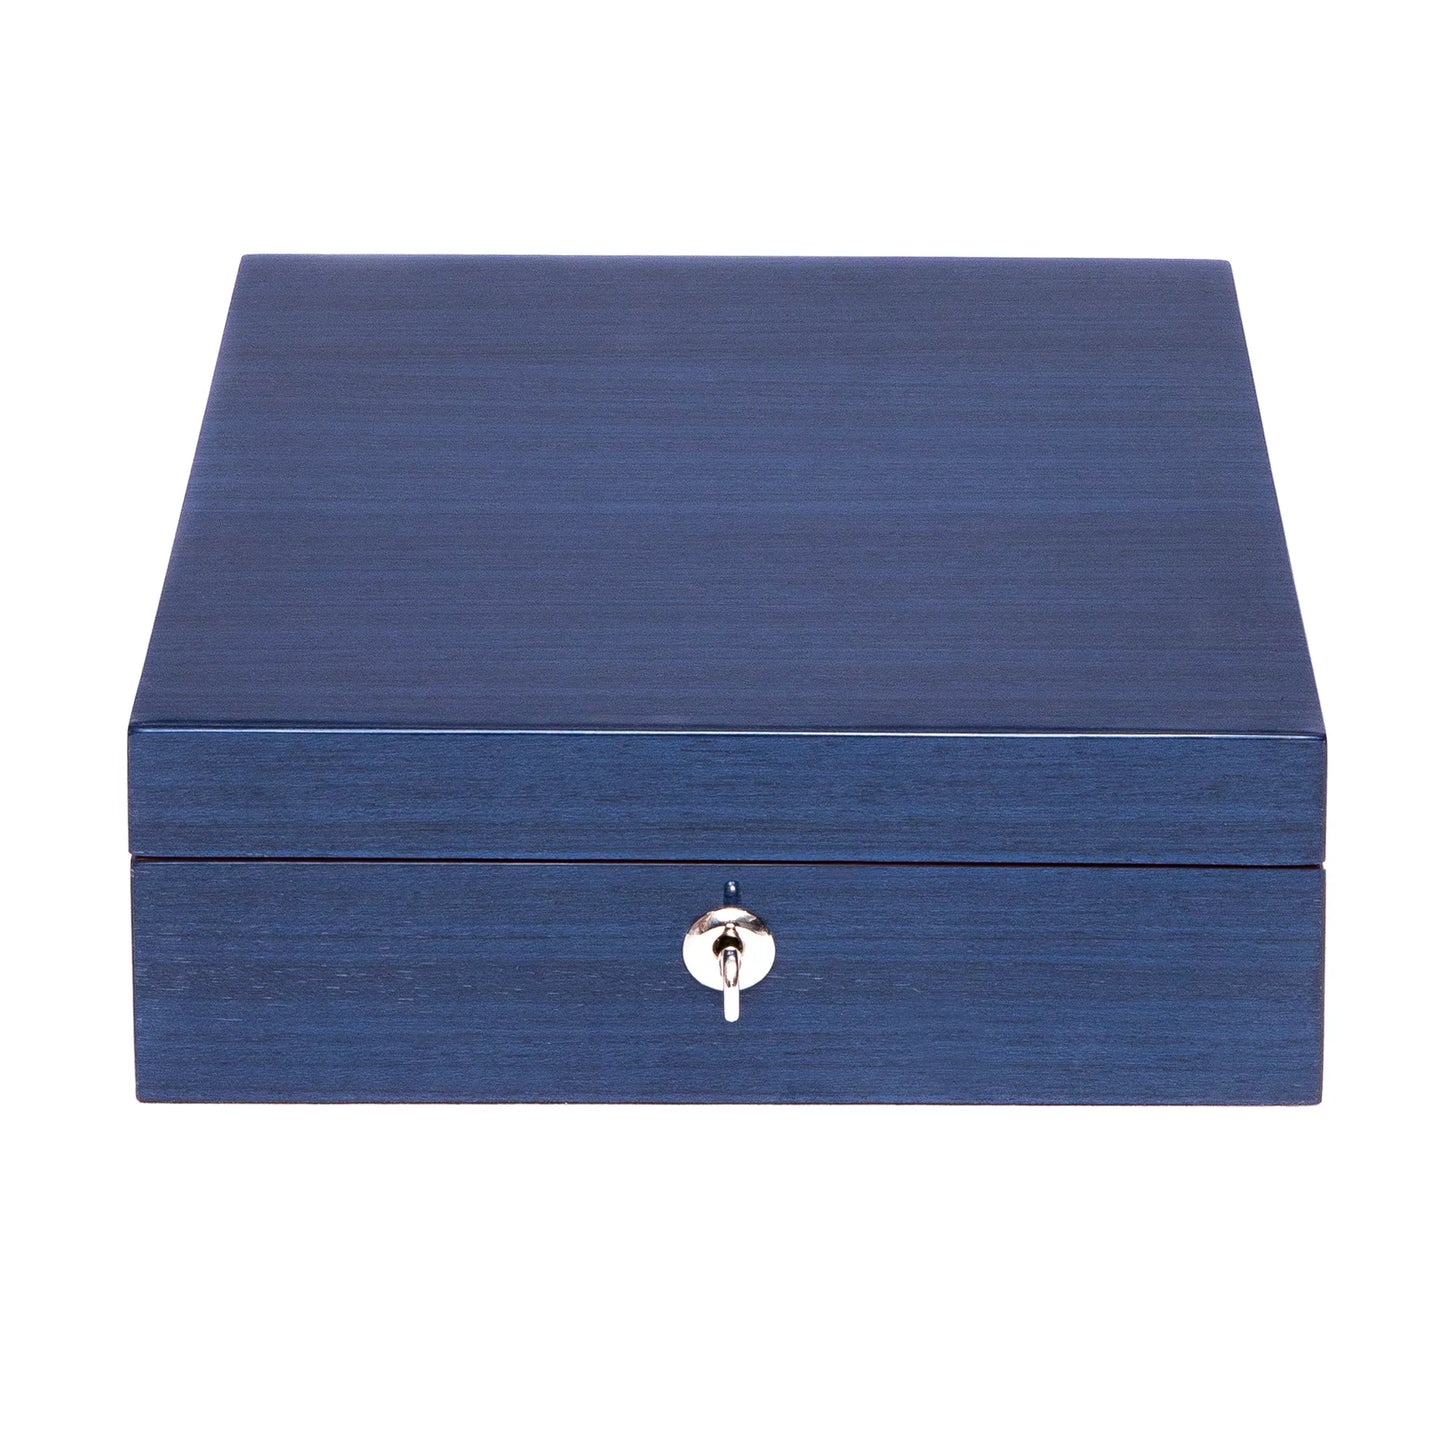 Heritage 4 Watch Collector Box - Navy Blue